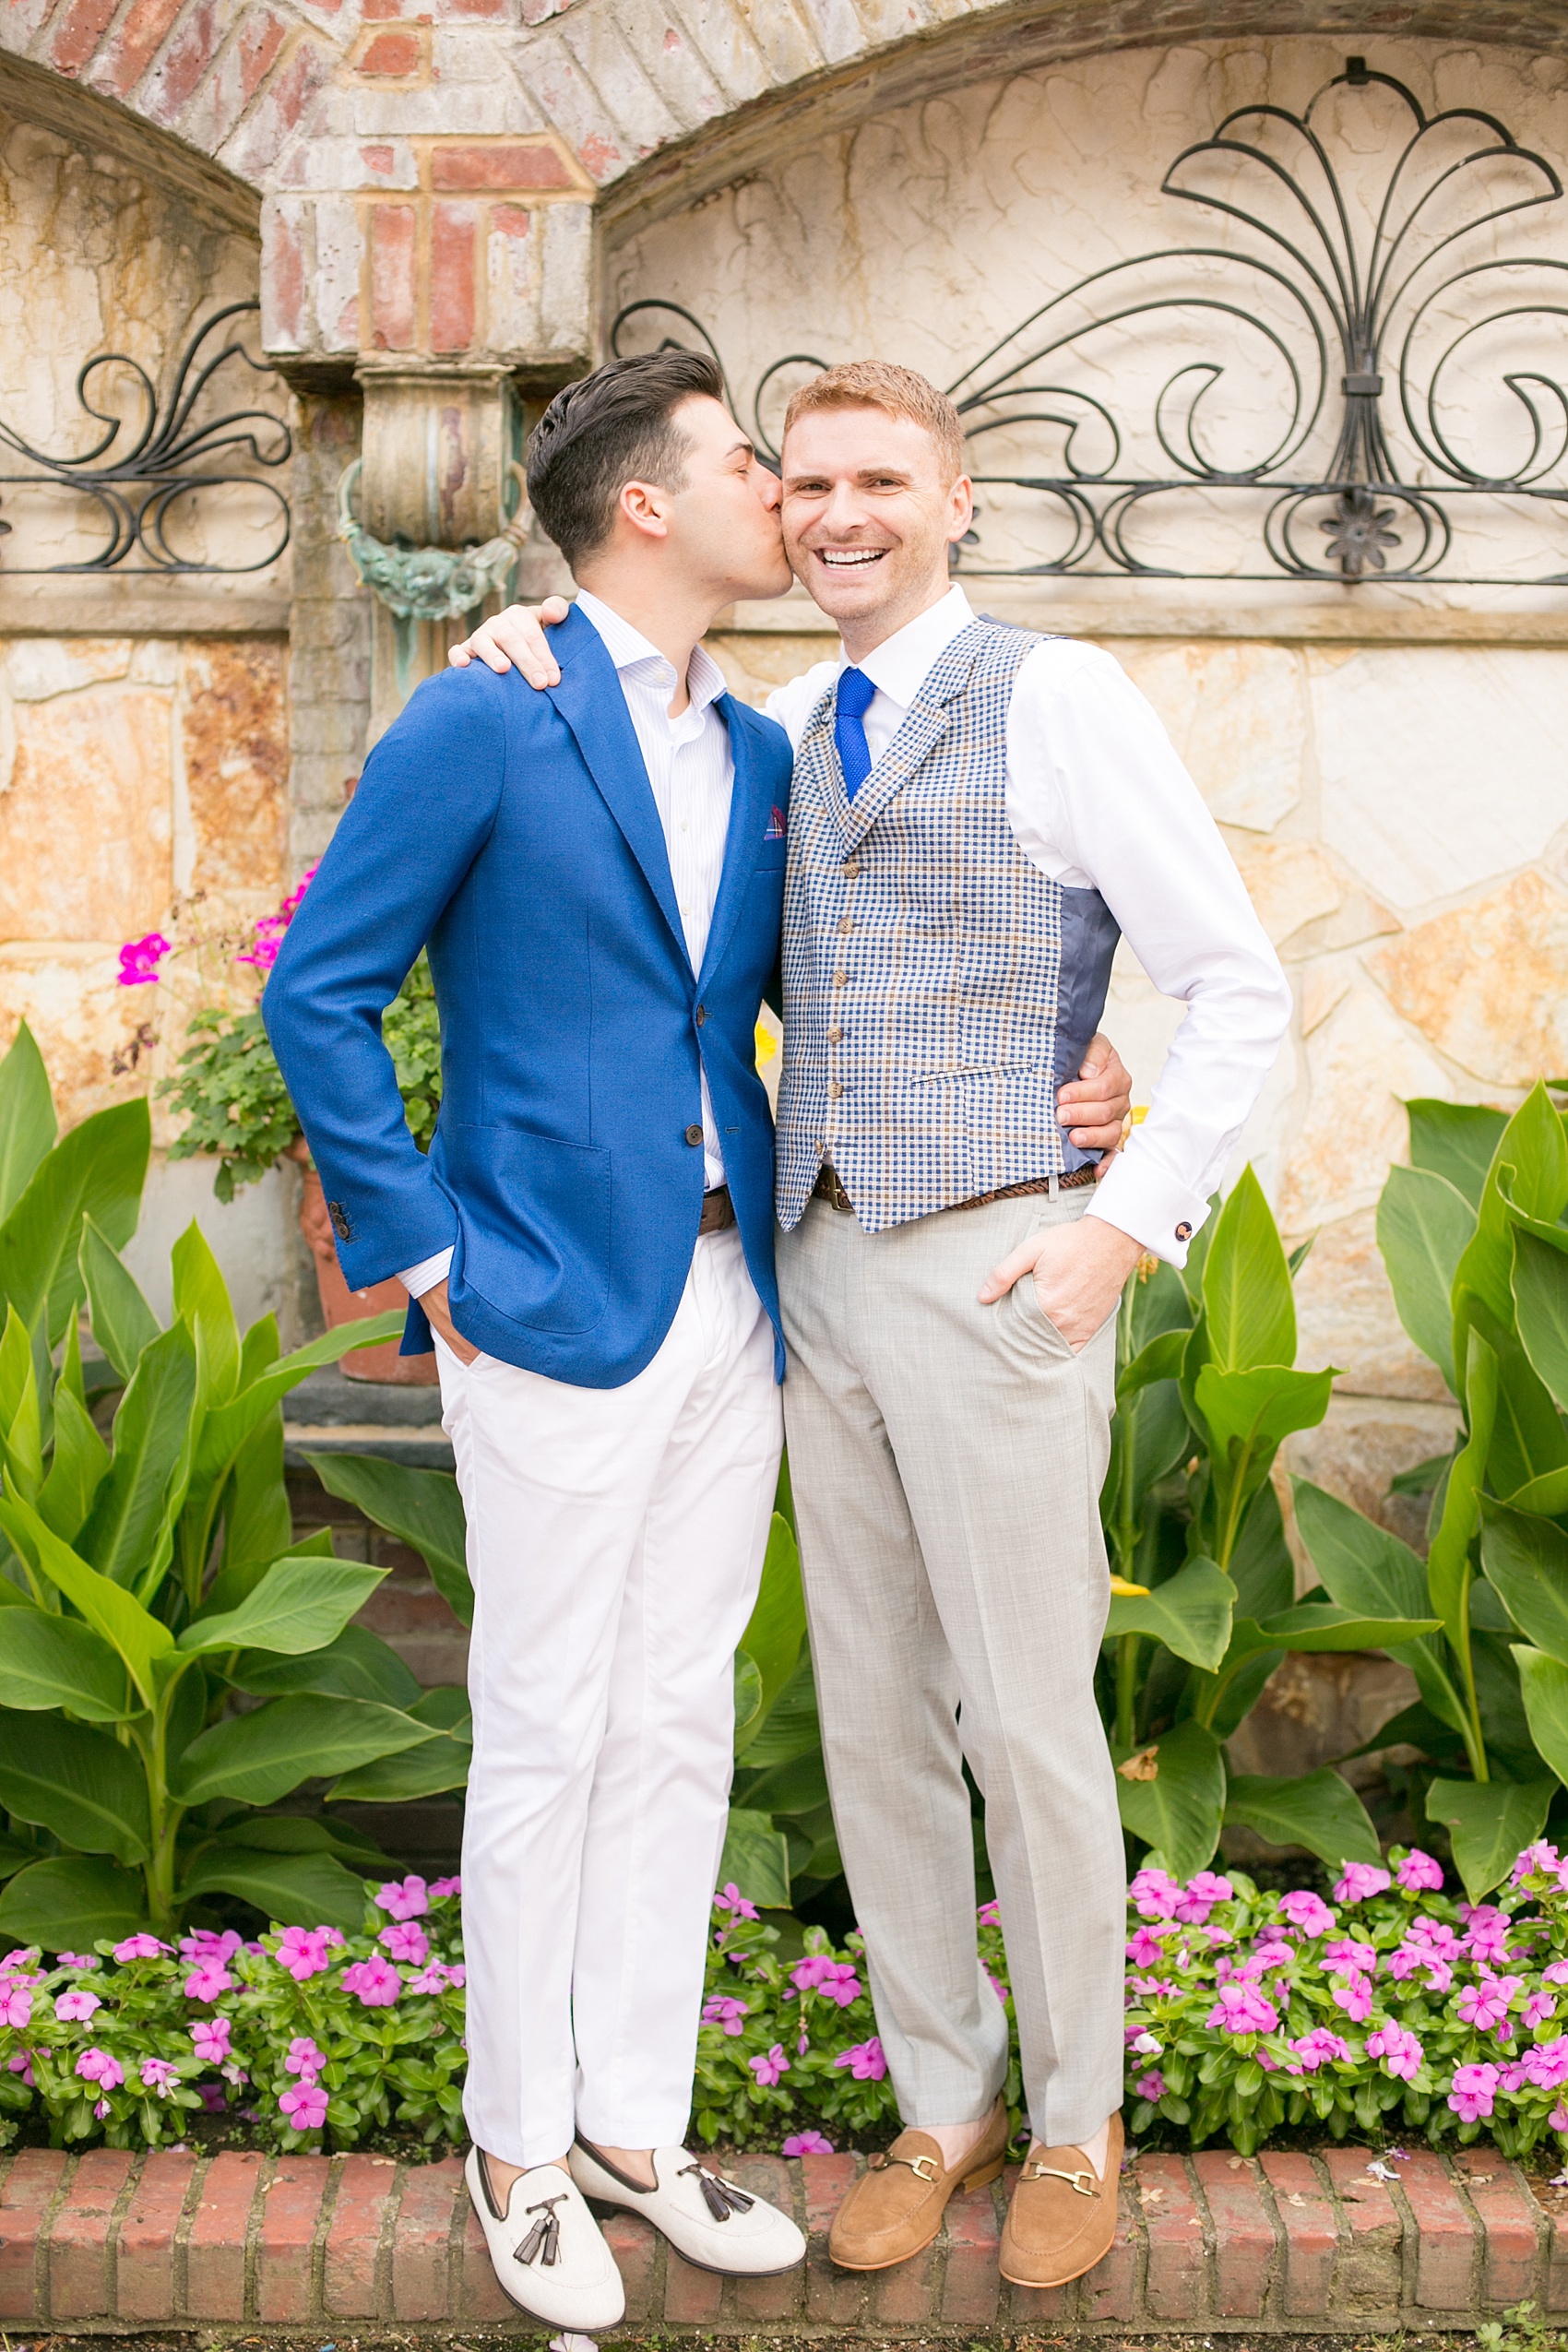 Mikkel Paige Photography photos of a summer, daytime gay wedding. An image of the grooms in a vest and blue suit in front of picturesque landscaping at The Manor, in West Orange New Jersey.